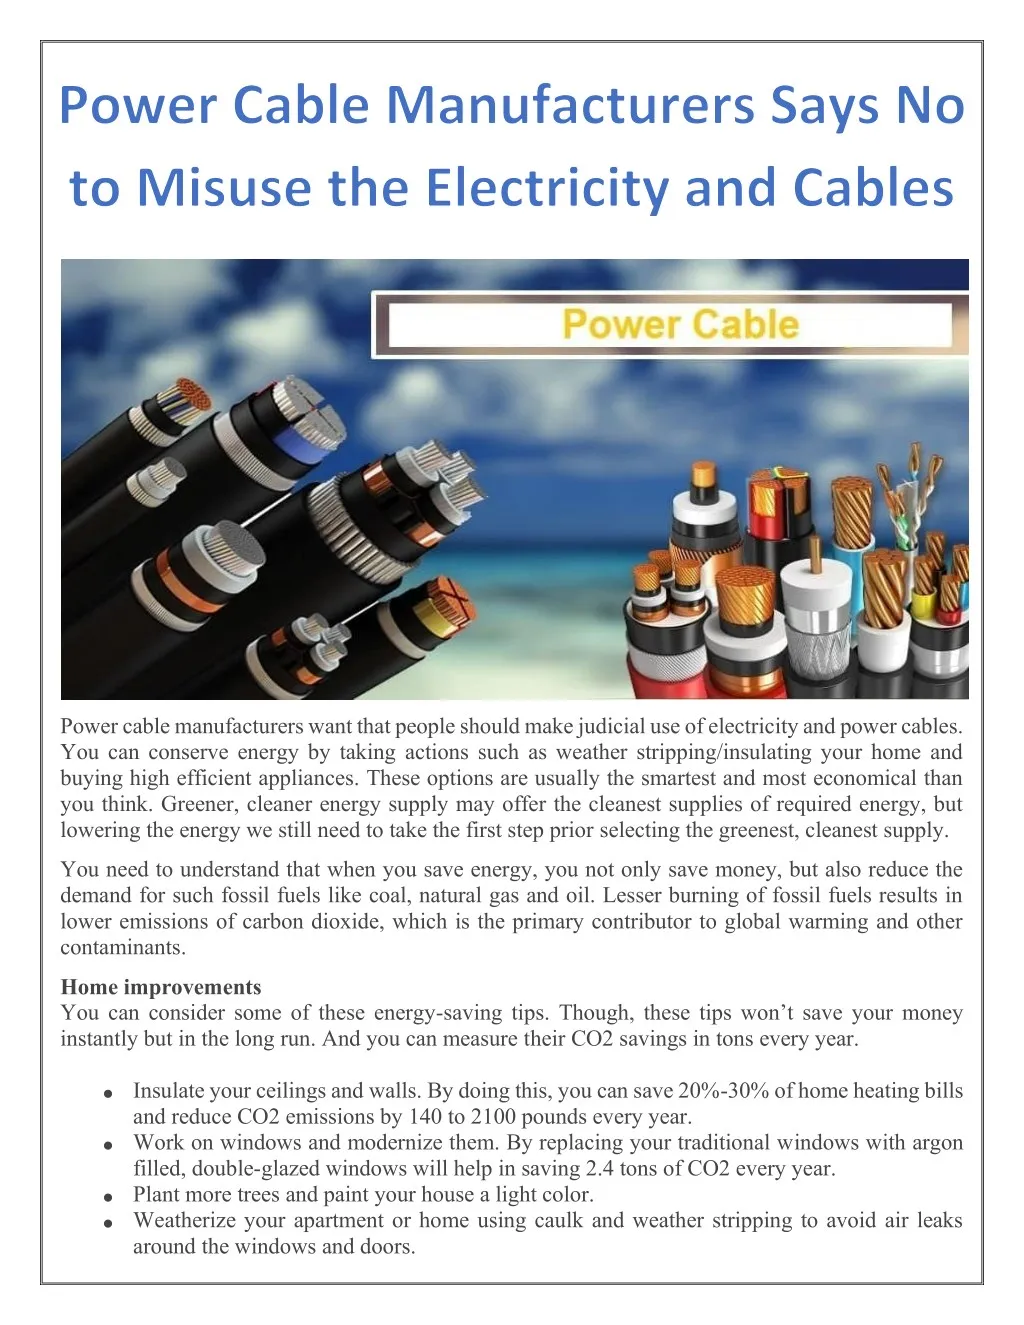 power cable manufacturers want that people should